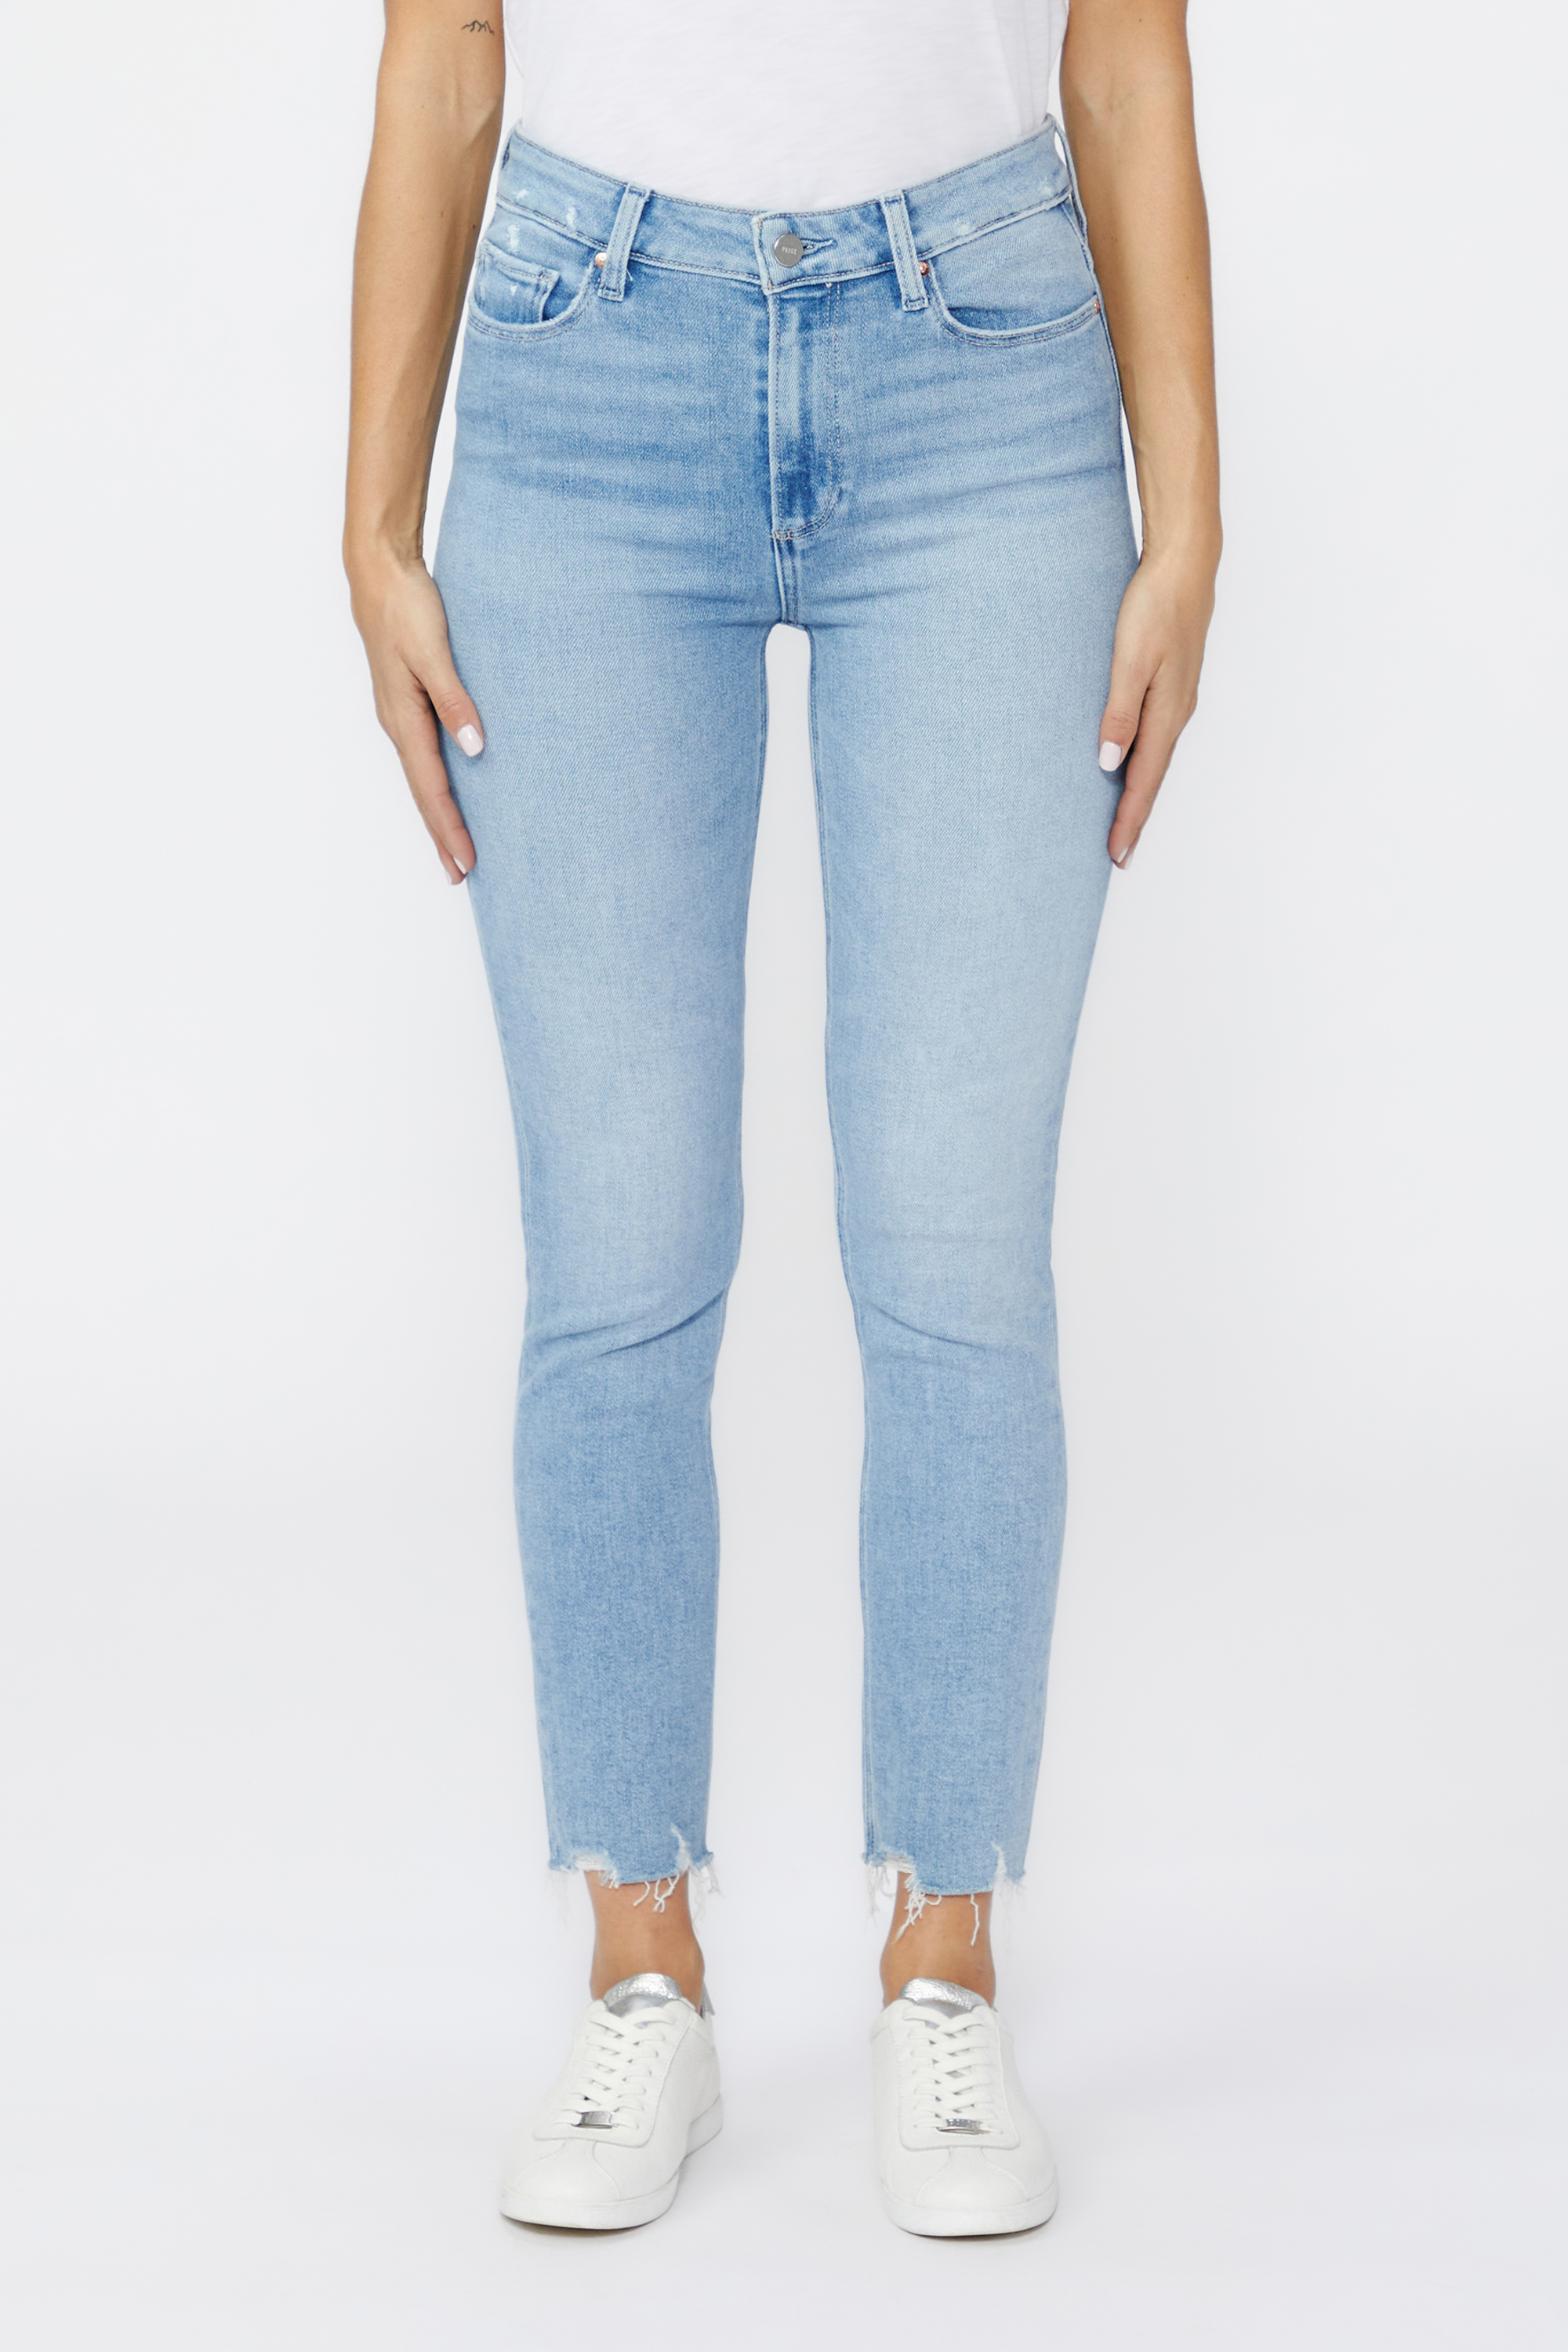 Hoxton Love Pull On Skinny Jeans, Paige